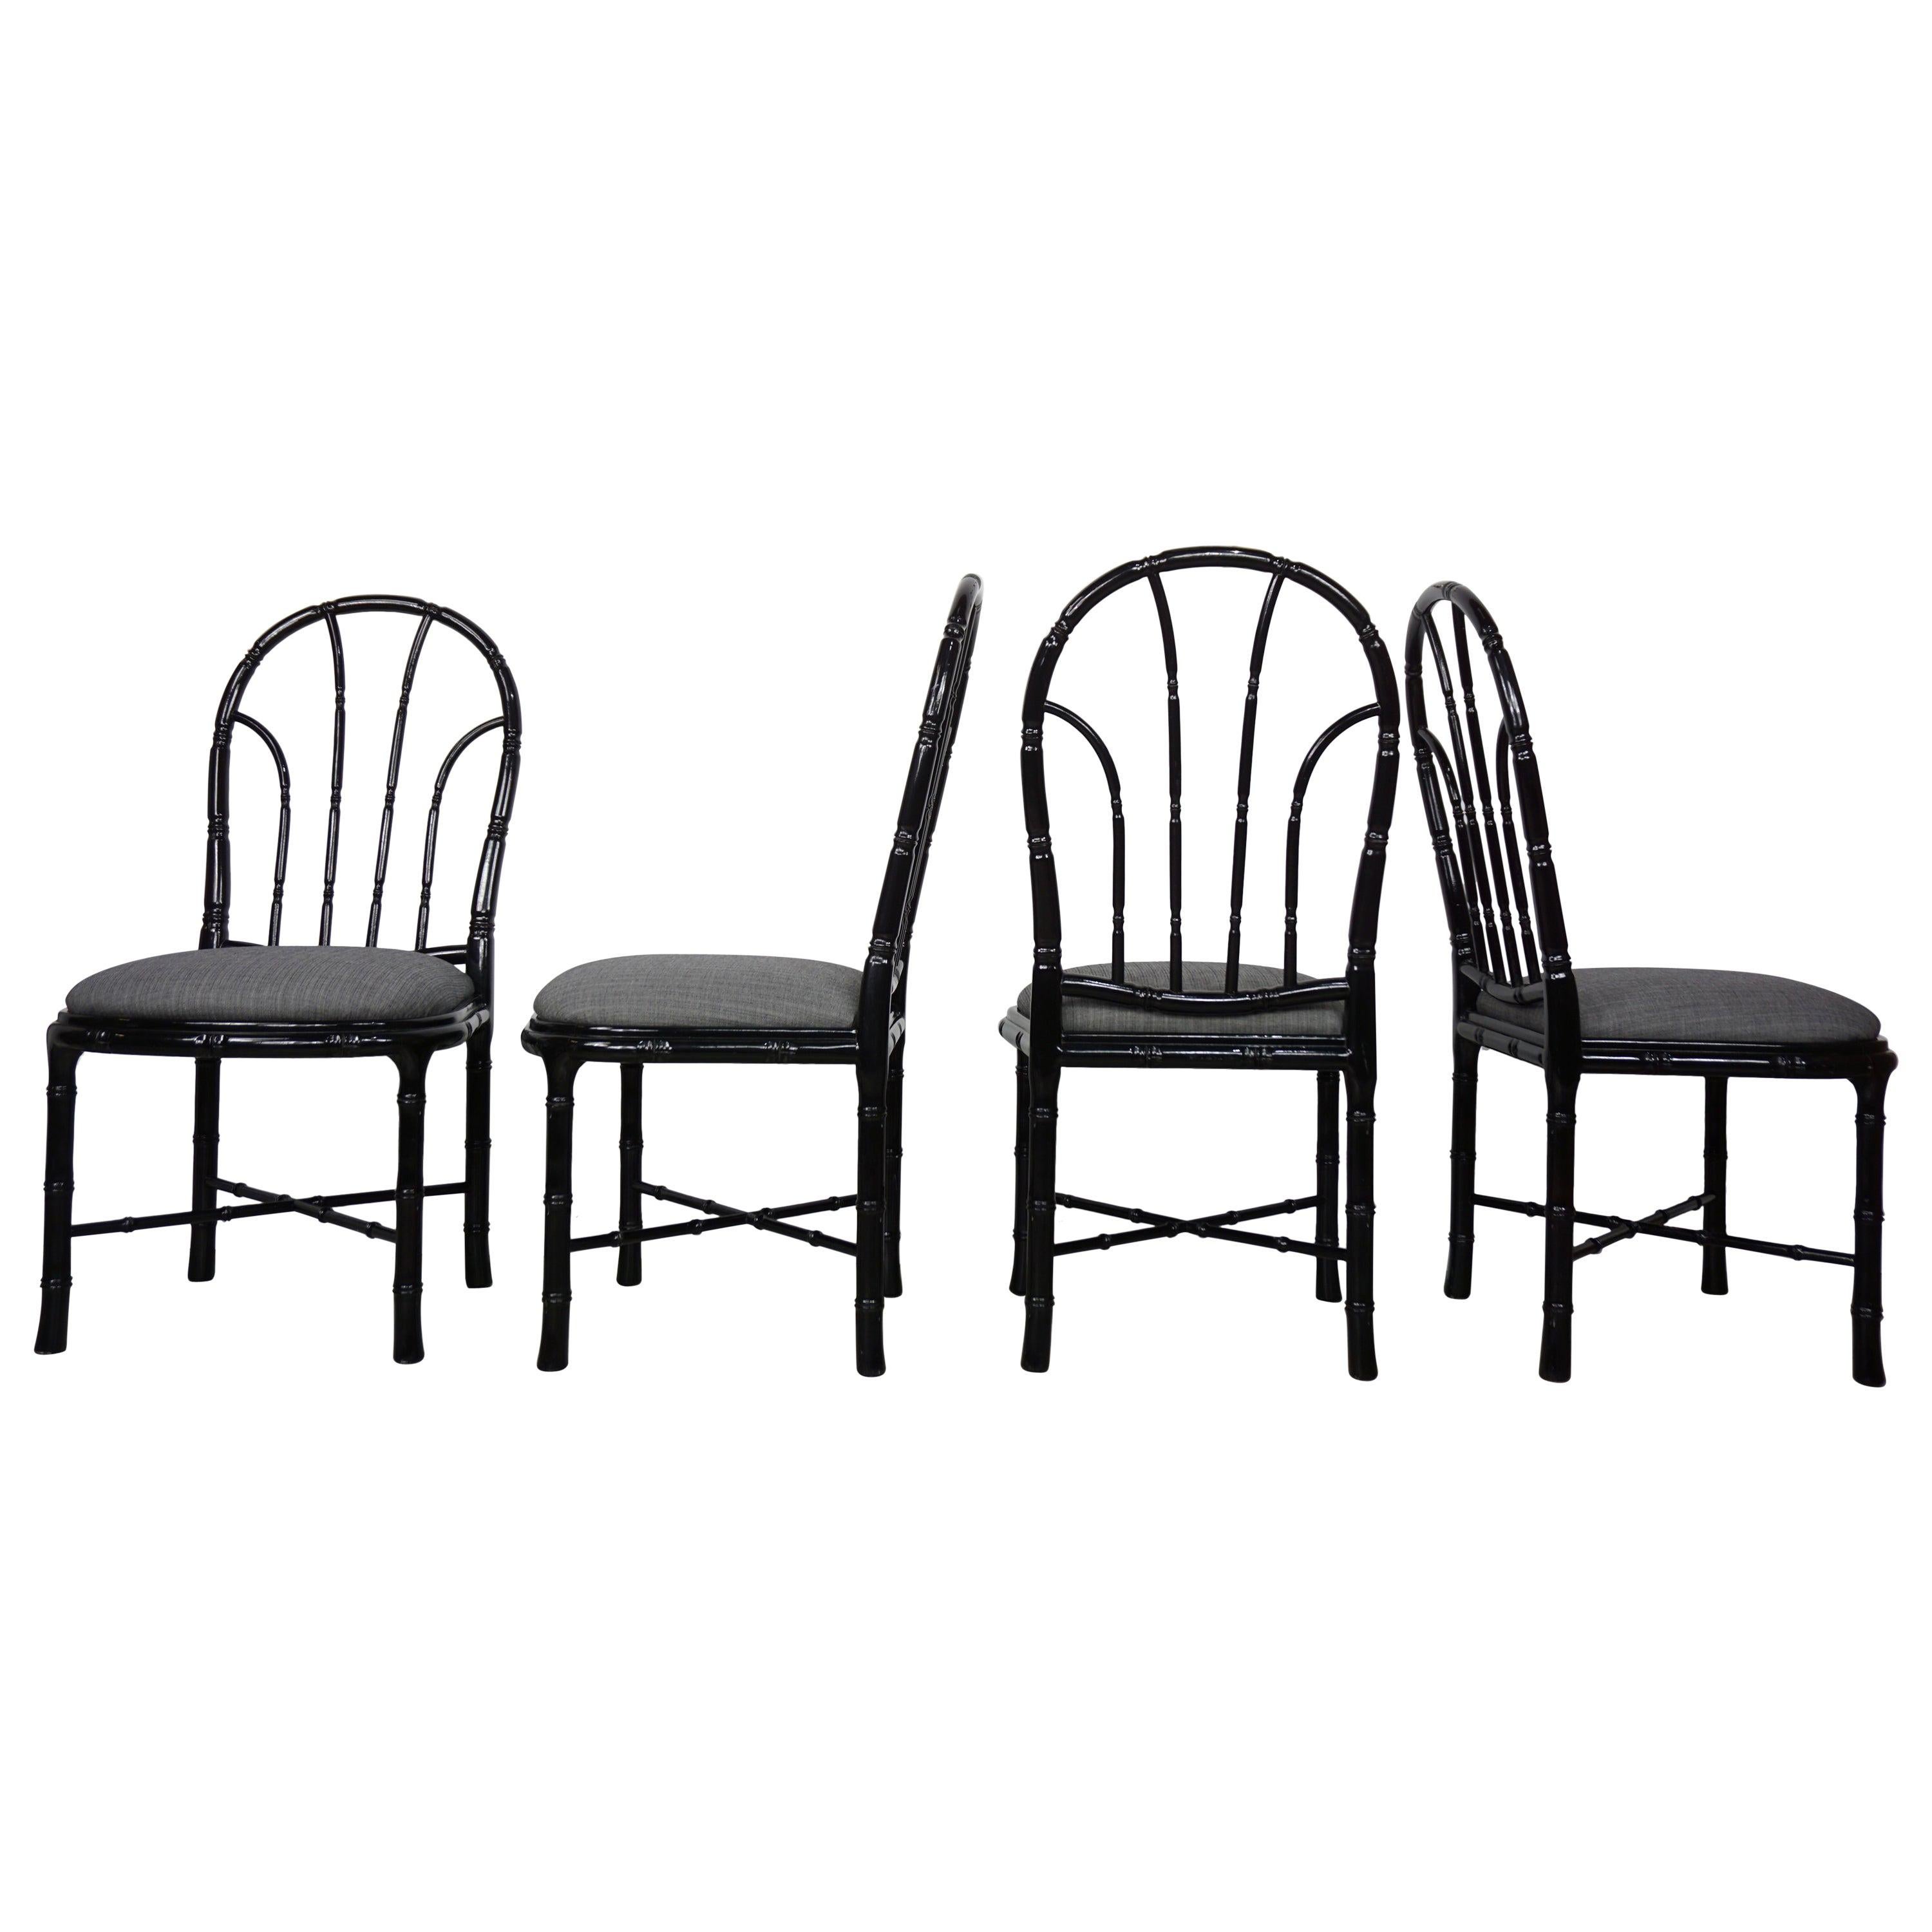 Italian Design Black Lacquered Wooden Bamboo Effect Set of Four Chairs